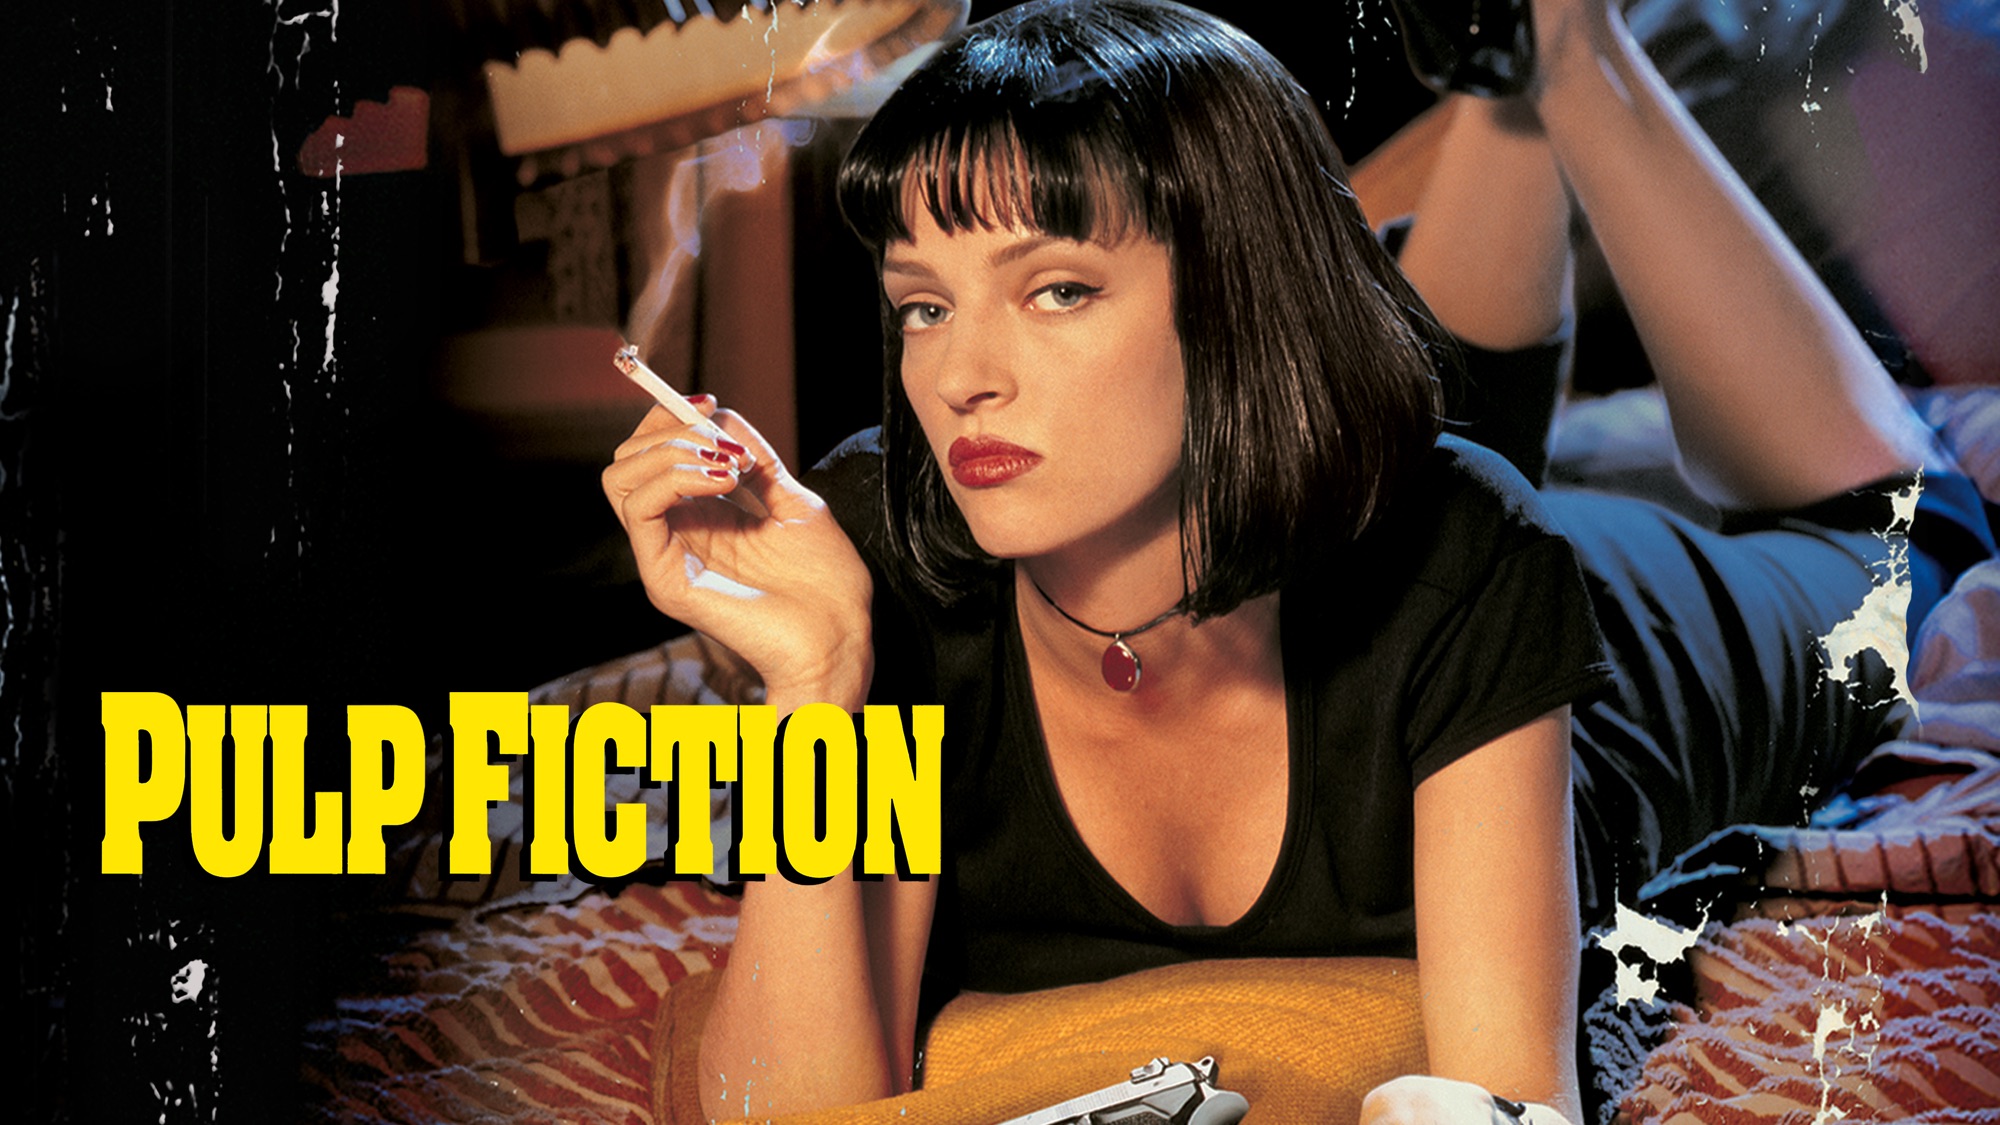 Movie Pulp Fiction HD Wallpaper Background Image.